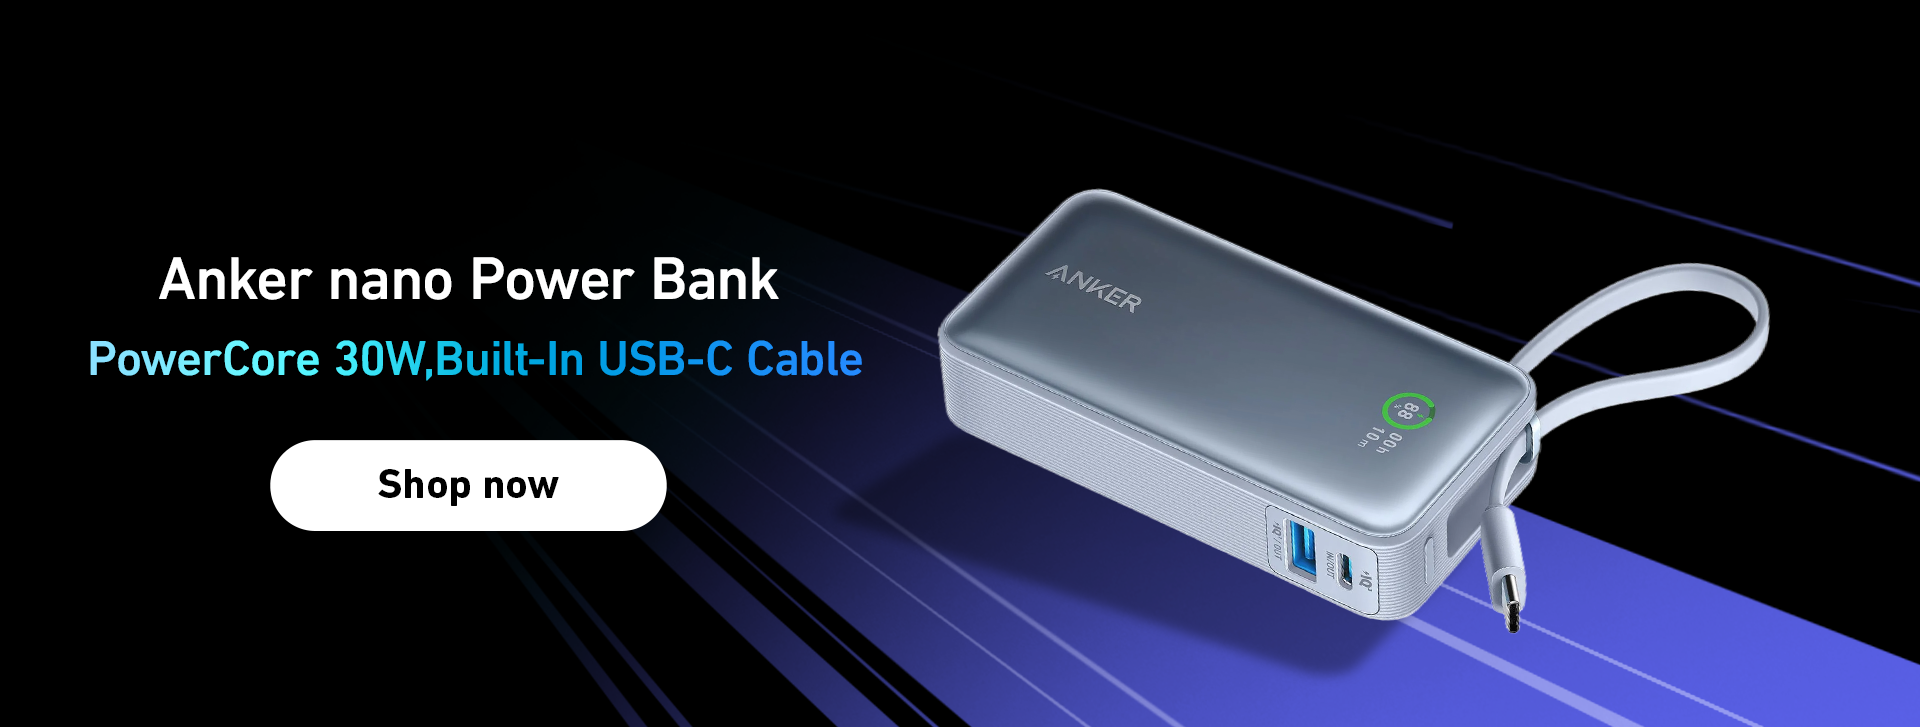 Anker nano Power Bank (PowerCore 30W,Built-In USB-C Cable) -Blue